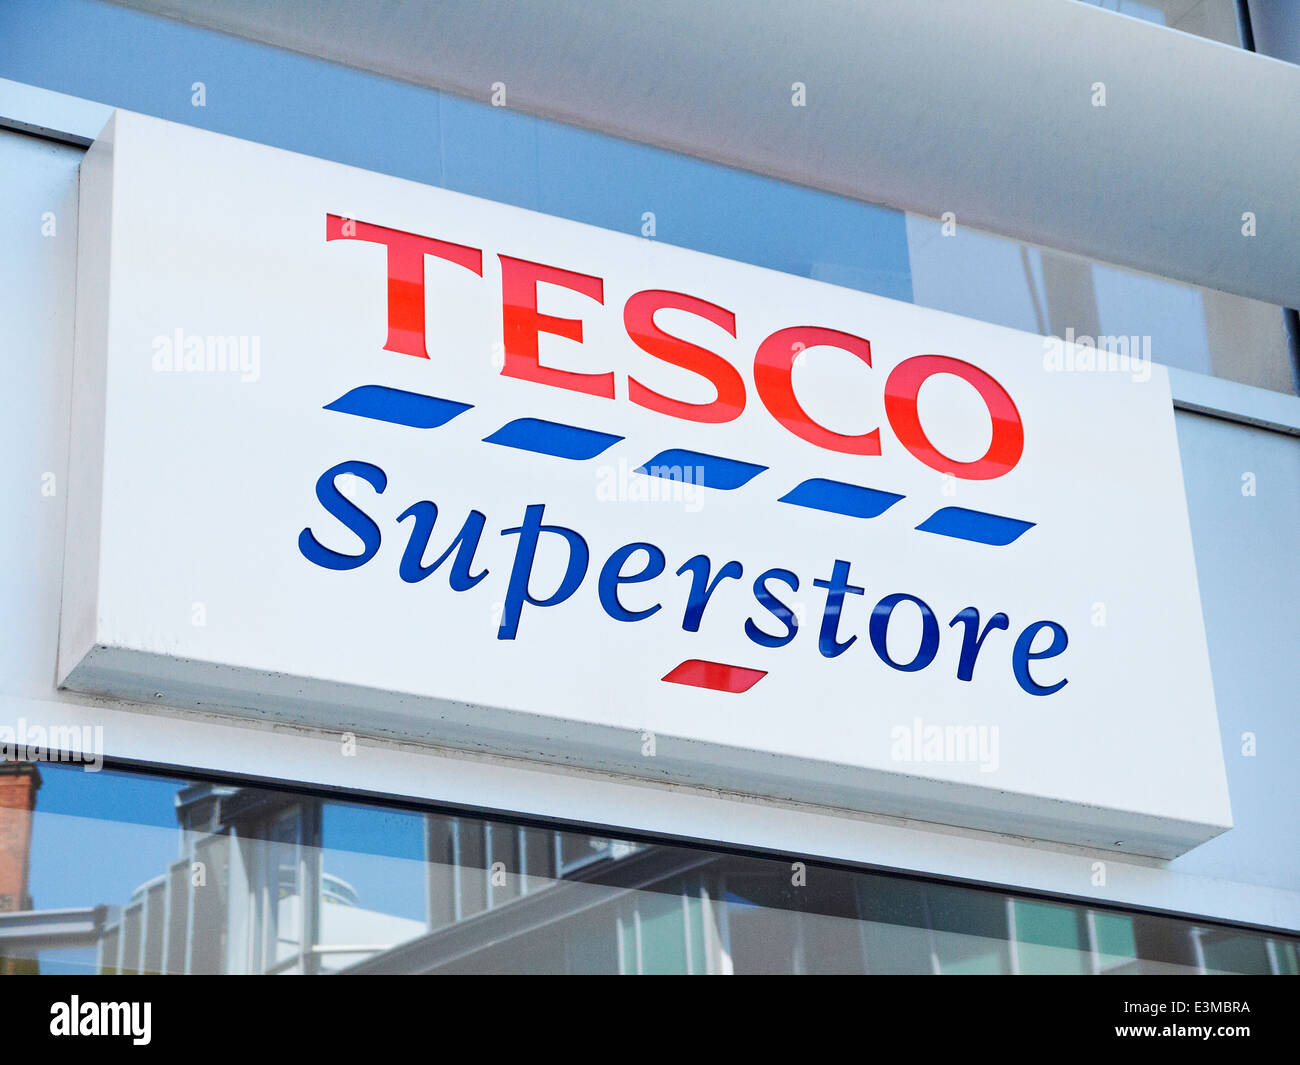 Tesco Superstore sign on outside wall UK Stock Photo